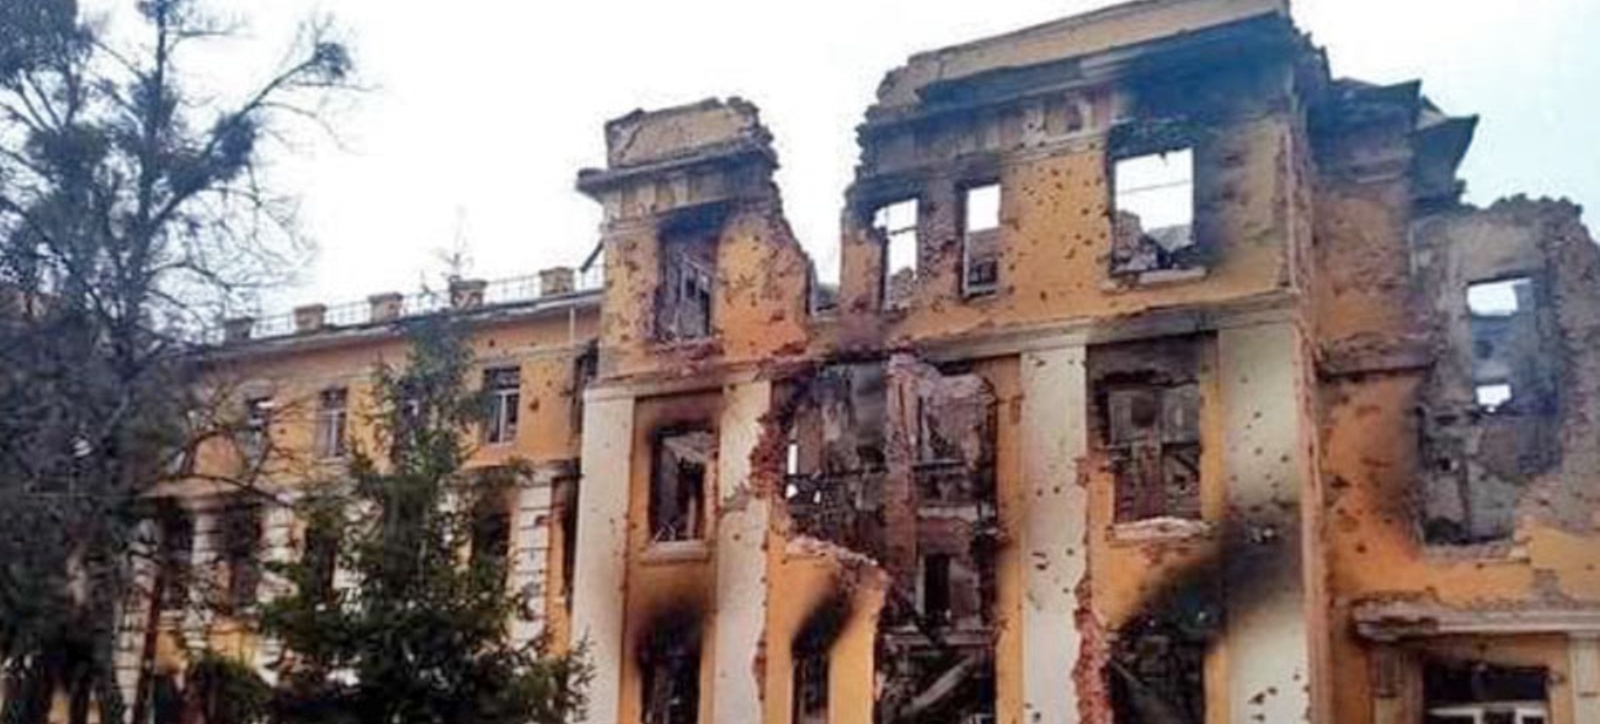 The remains of a bombed Ukrainian school, where children once learned and played.